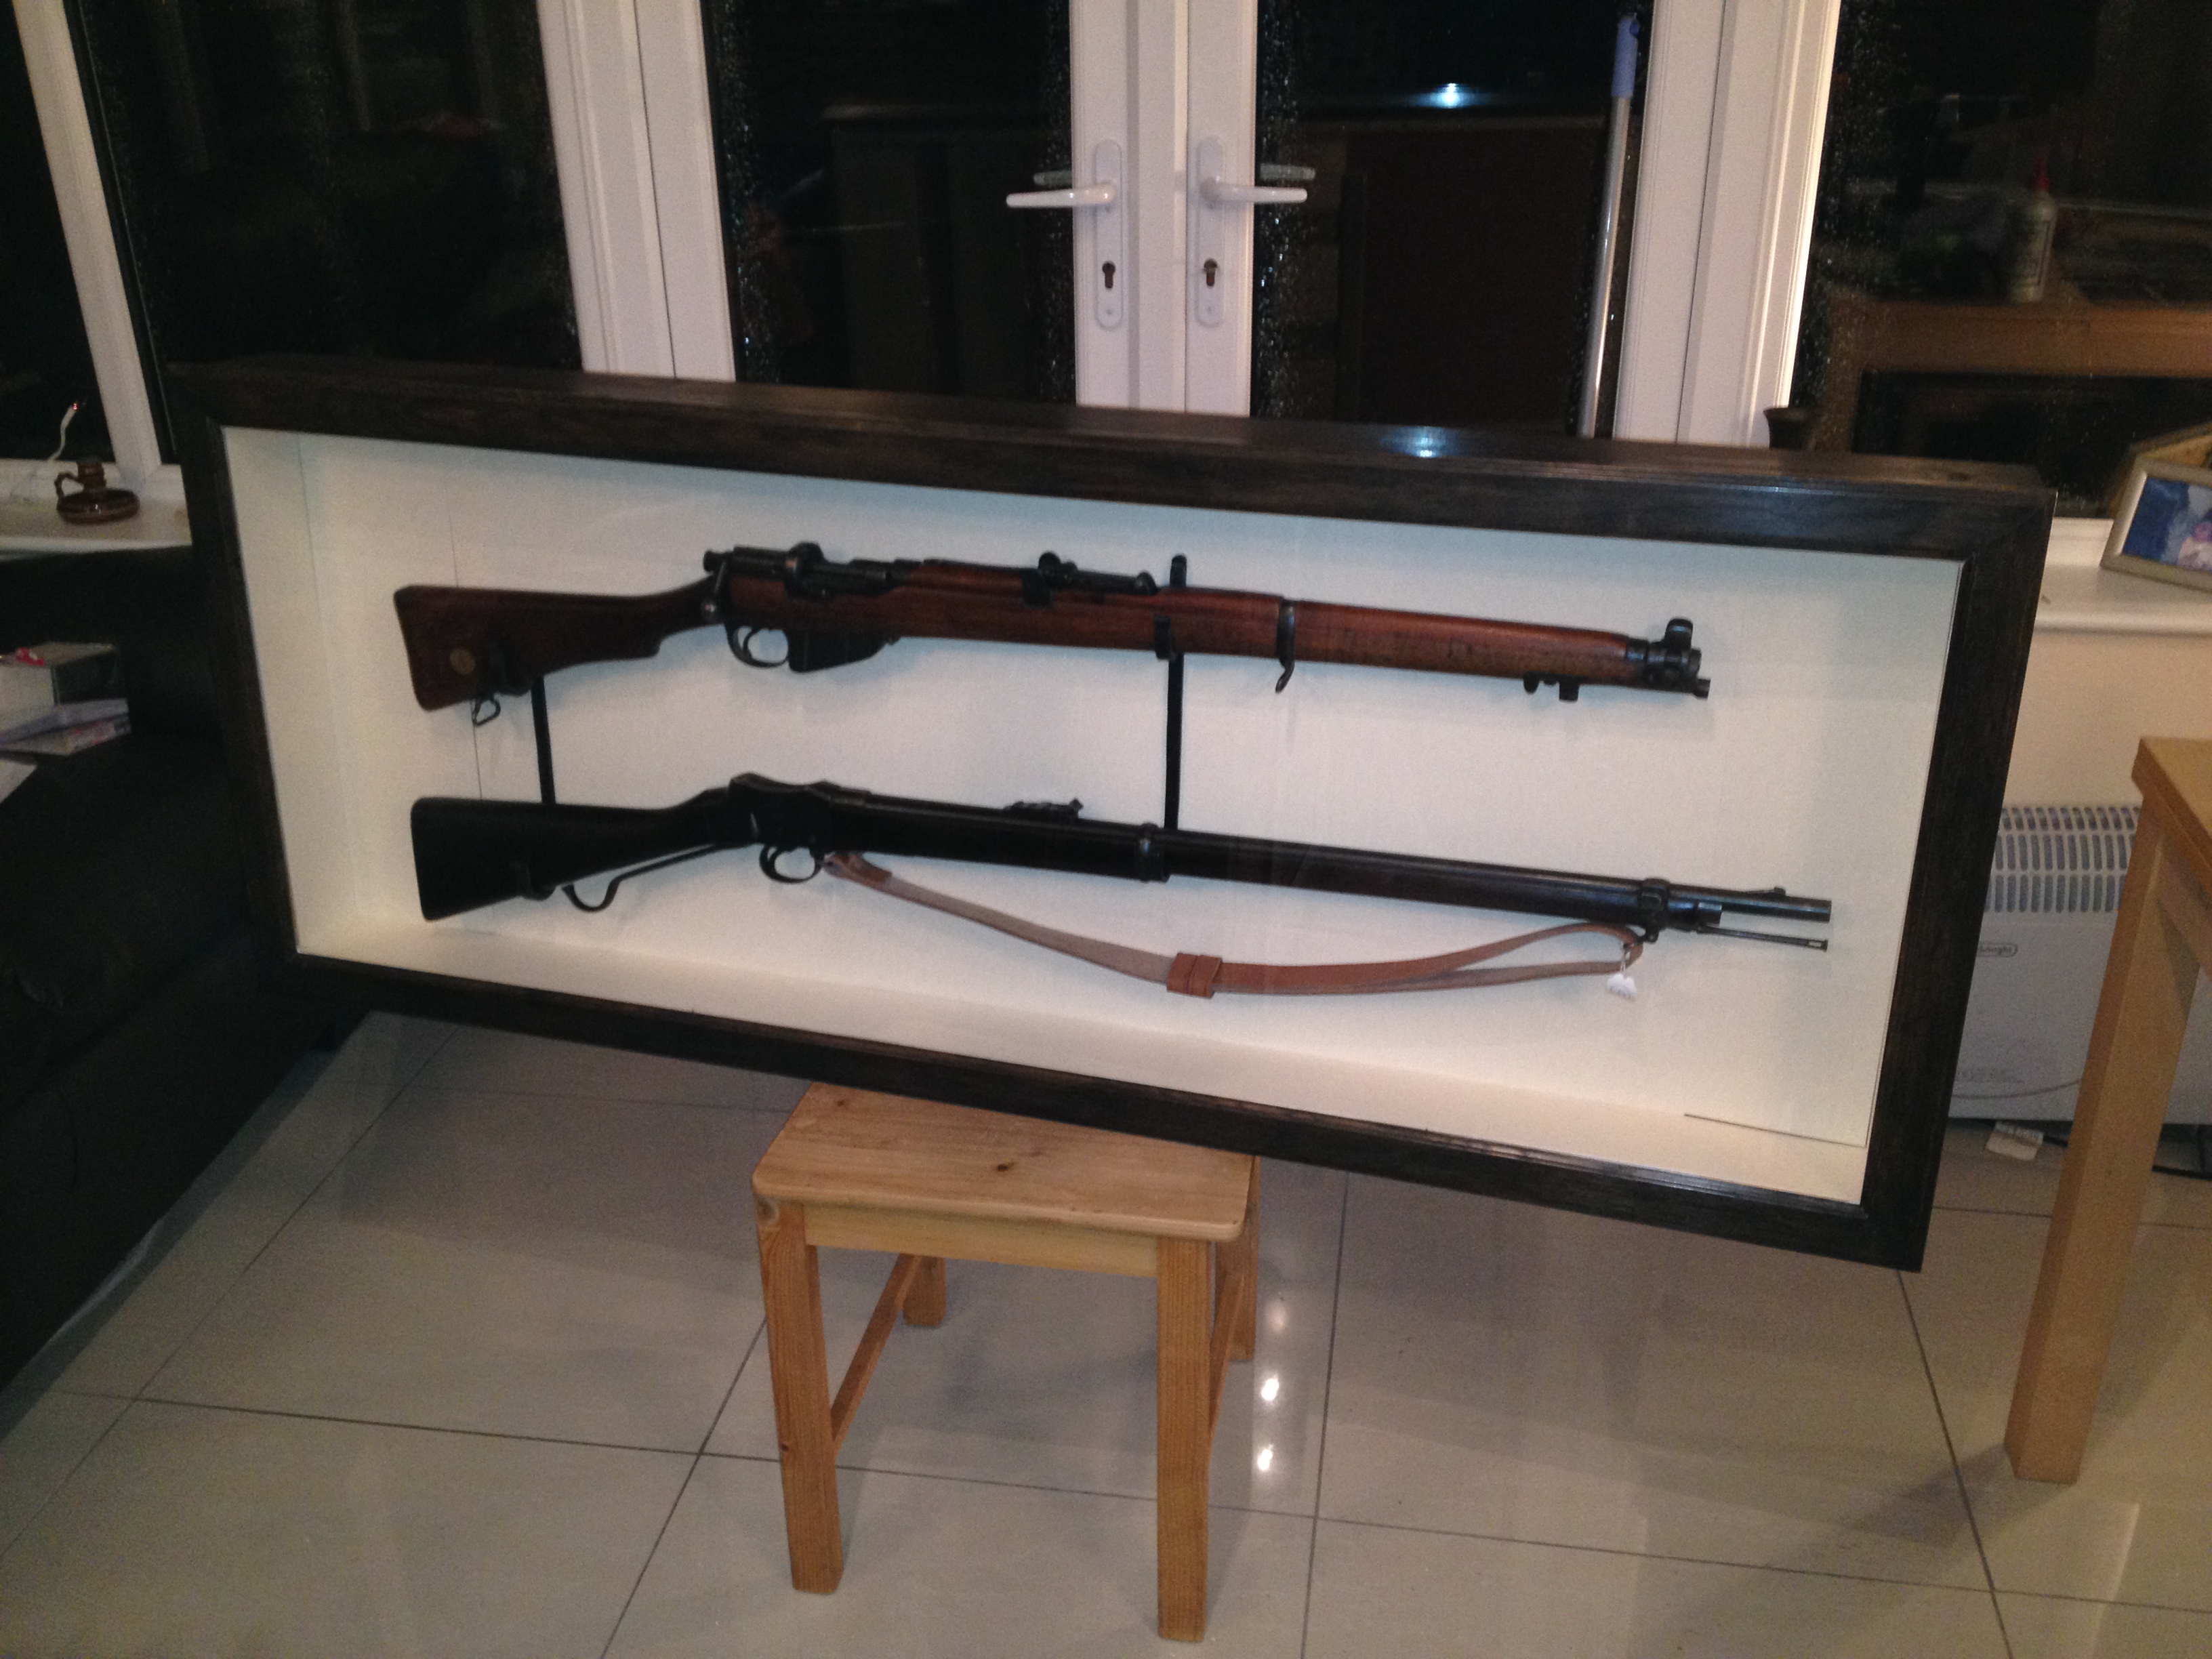 Martini-Henry and Lee Enfield SMLE rifles